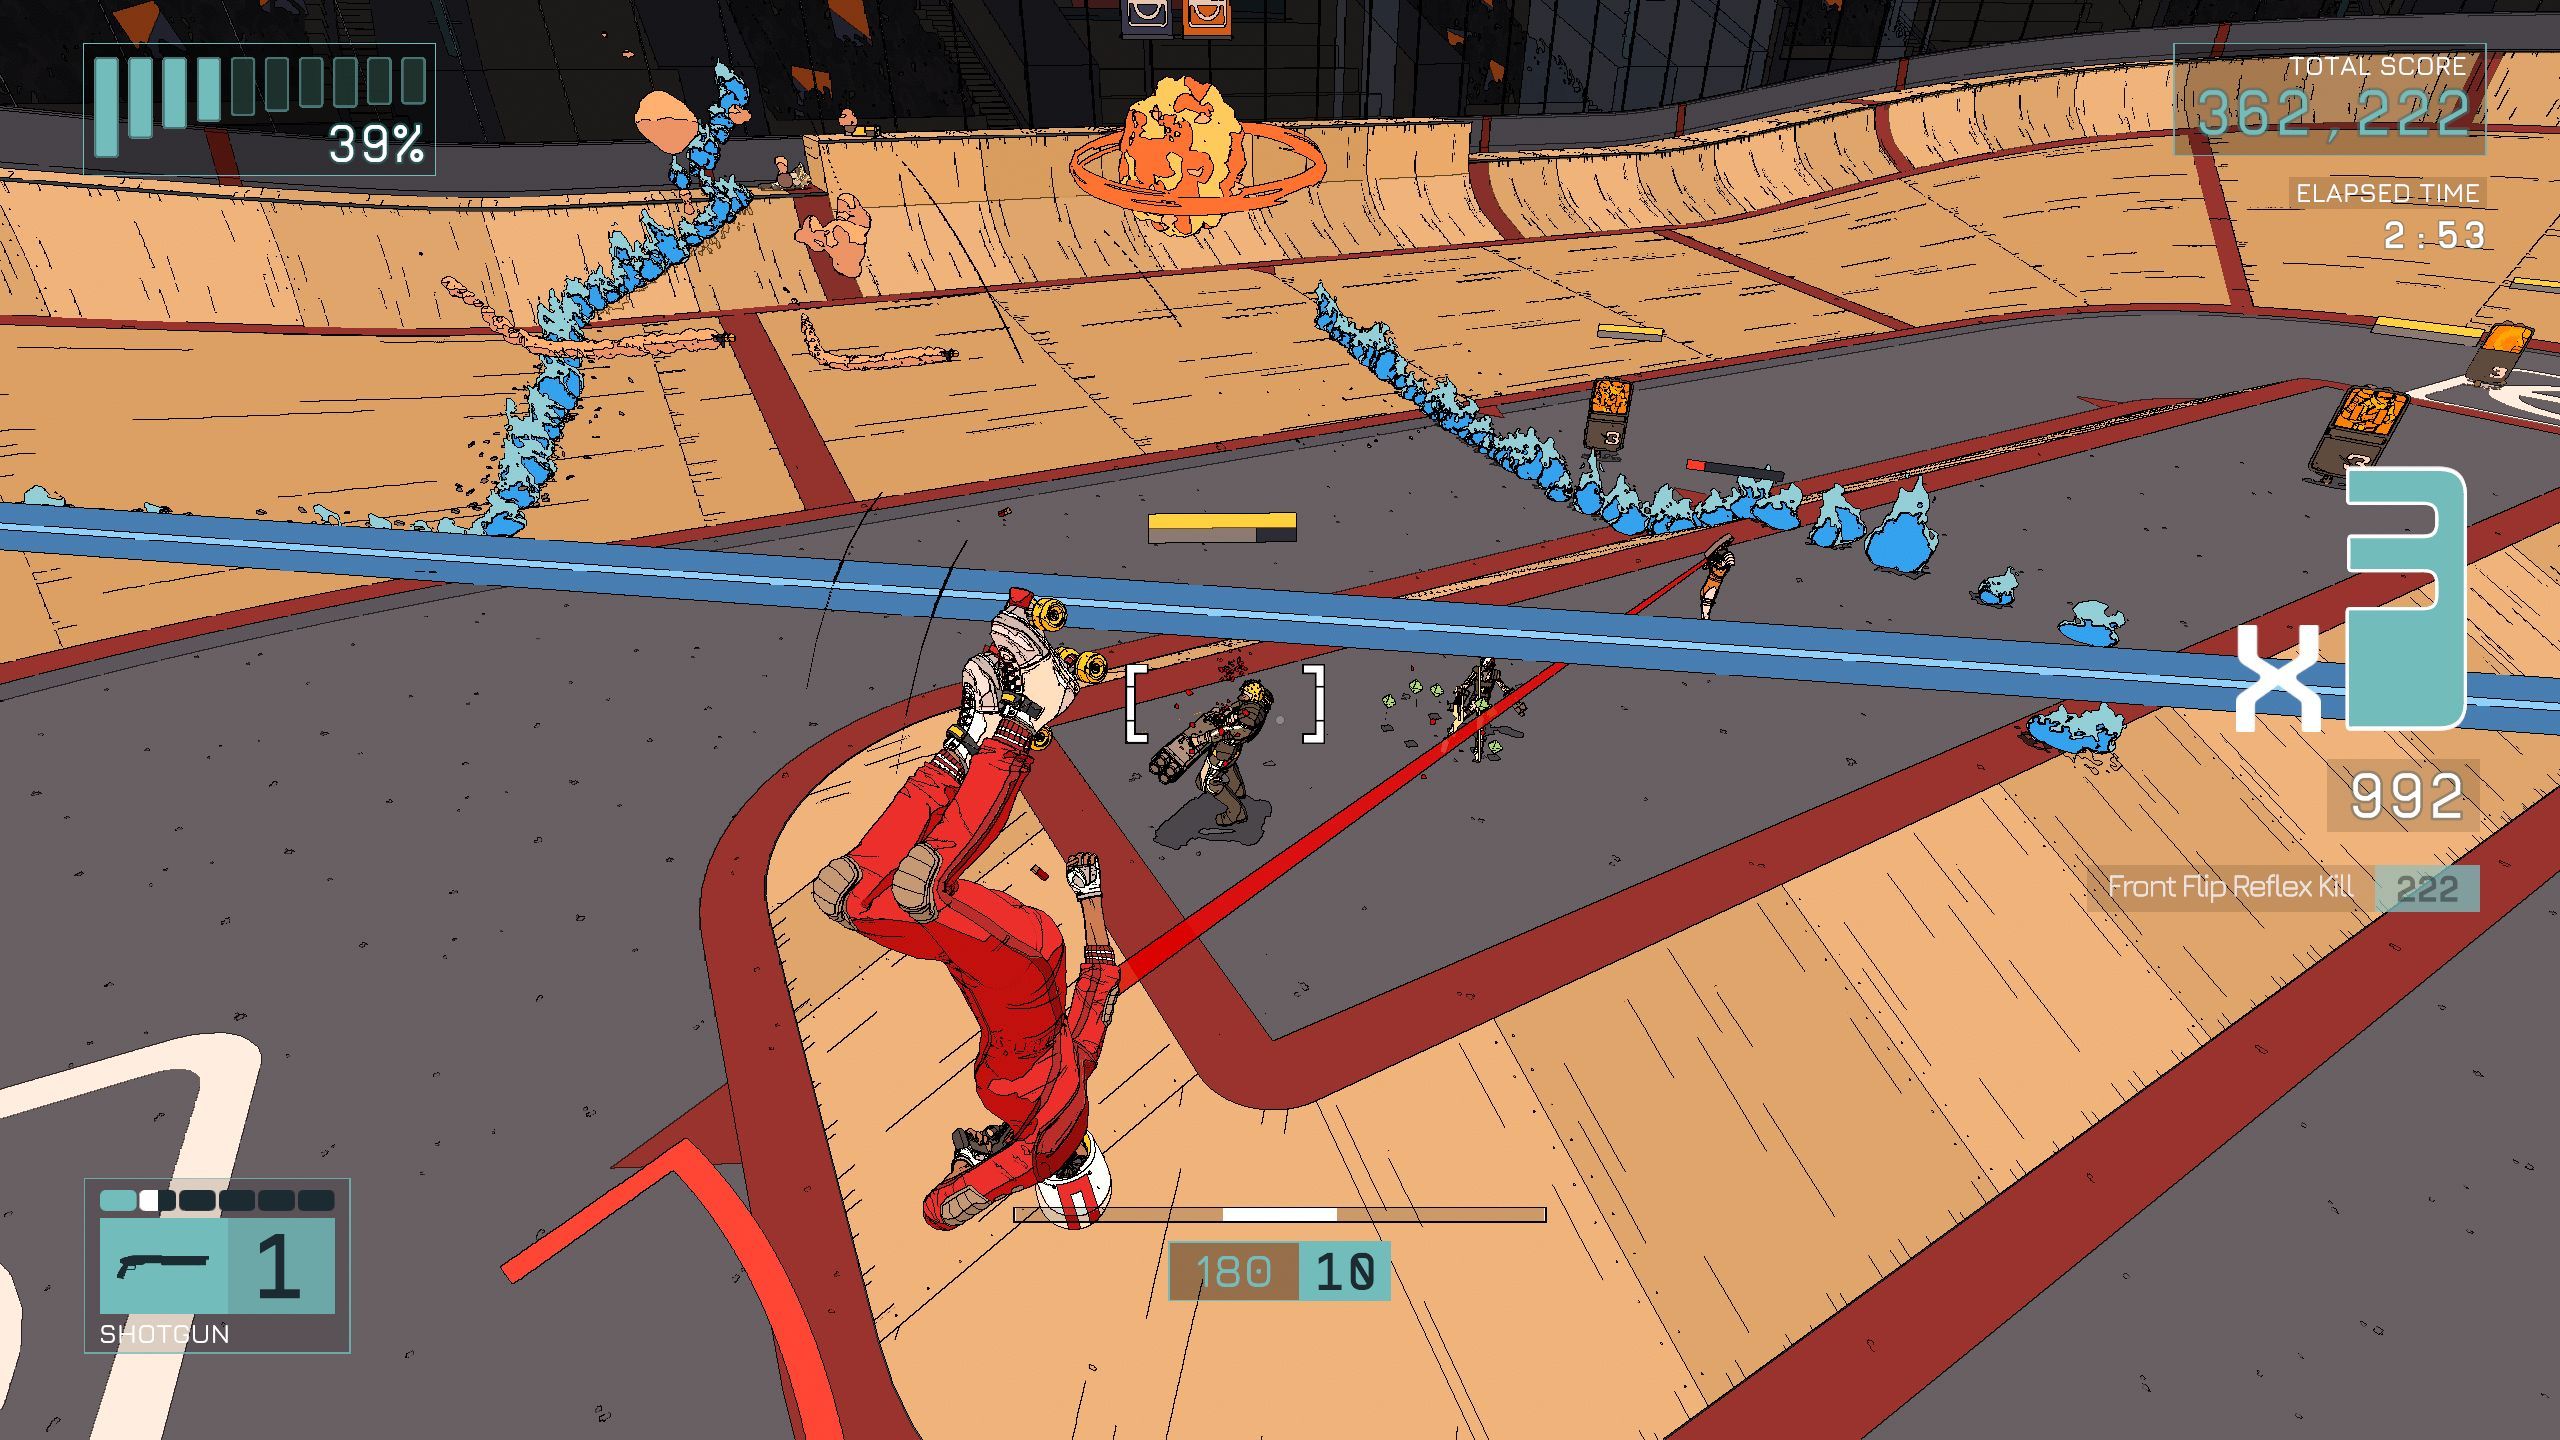 Rollerdrome's smooth, bullet time bloodsport is locked and loaded - galaxyconcerns